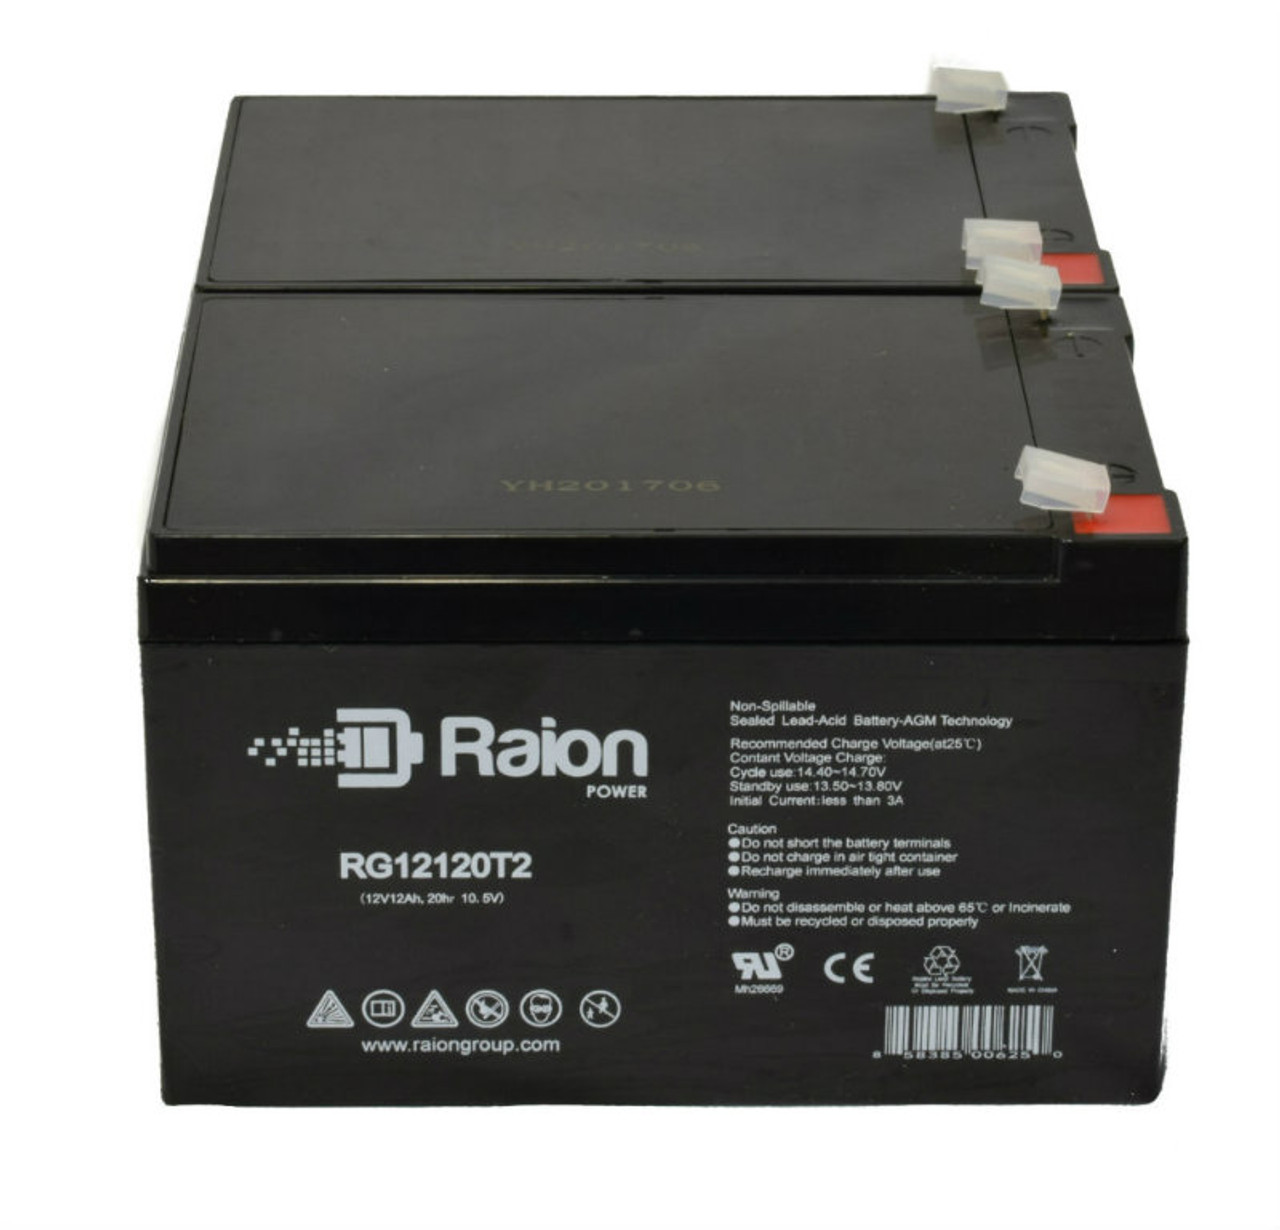 Raion Power 12V 12Ah Non-Spillable Compatible Replacement Battery for Canbat CBL12-12 - (2 Pack)